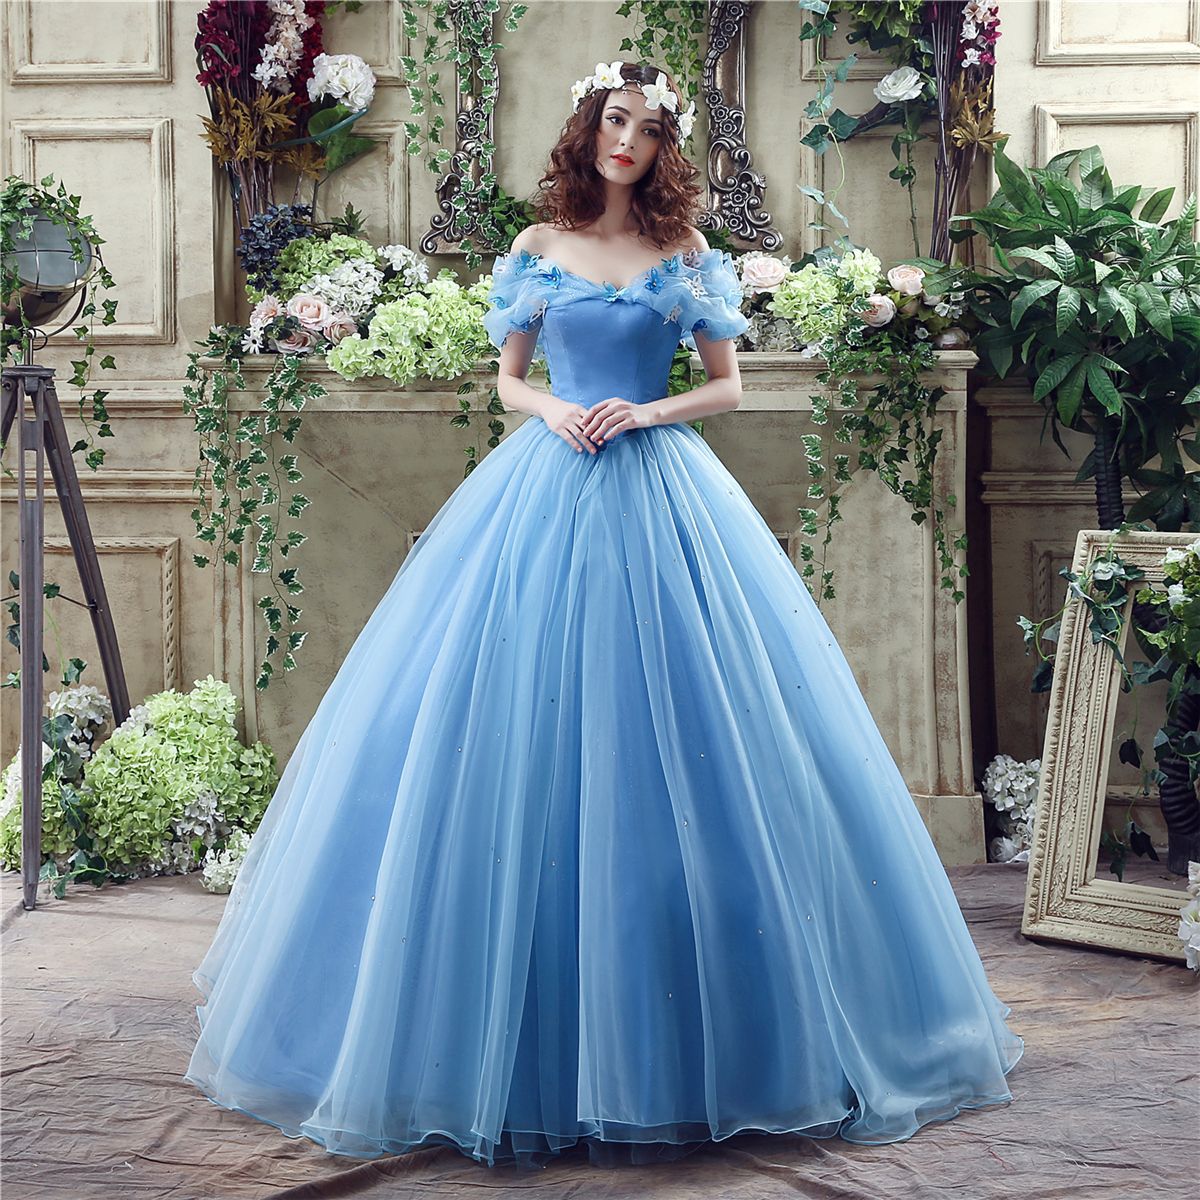 Princess Gown for any woman | Cinderella Quinceanera Woman Dress